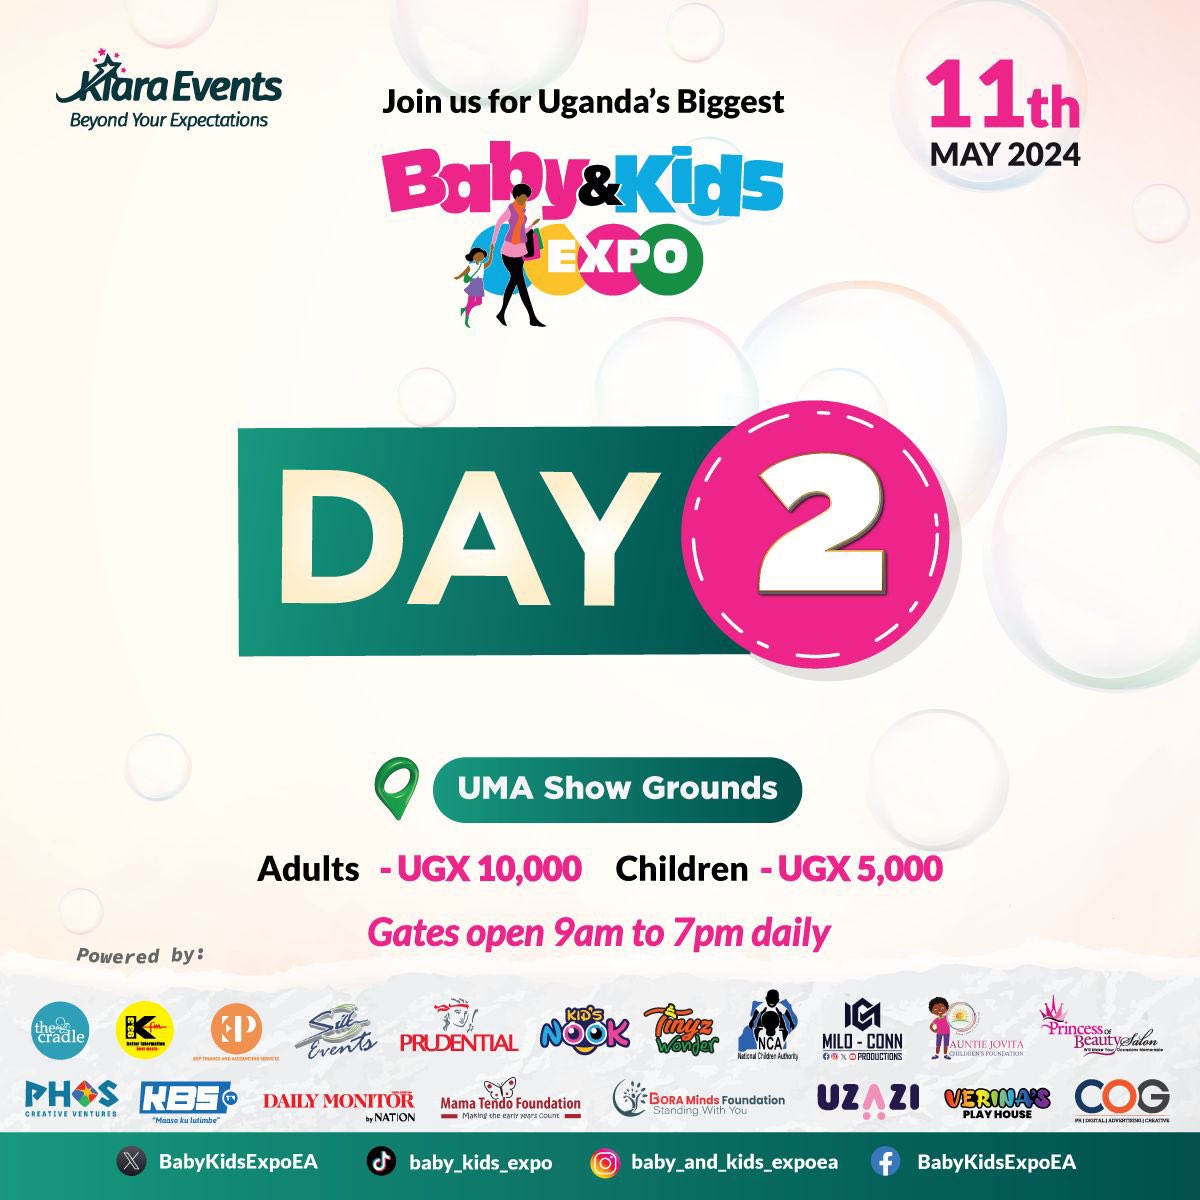 Join us for Day 2 of the #BabyandKidsExpo24! 
Bring your children for a day packed with fun, learning, entertainment, shopping, games, painting and much more.

Gates open from 9:00 am to 7:00 pm. Entrance fee: Adults - UGX 10,000, Children - UGX 5,000.

#KiaraEvents